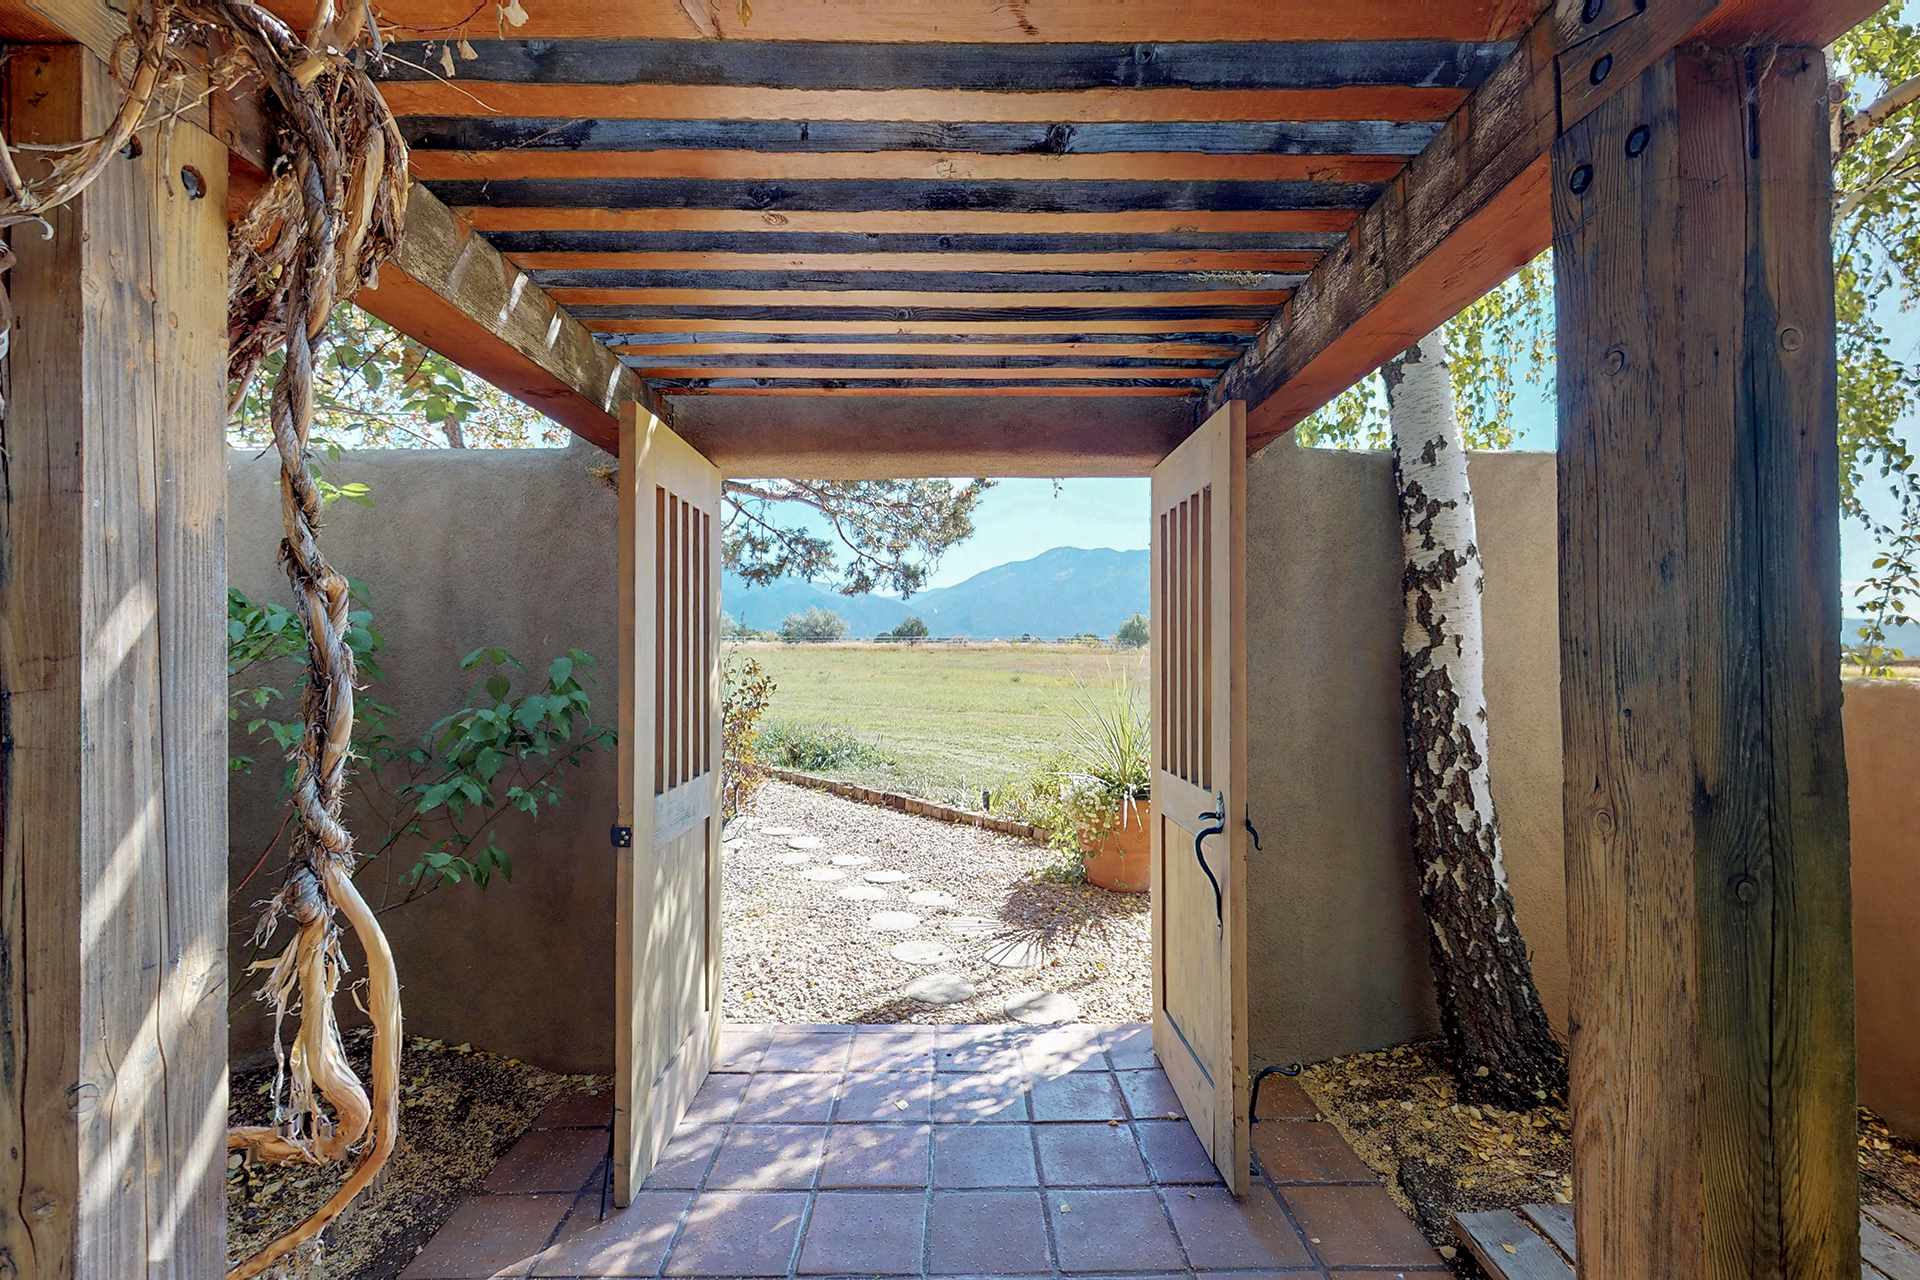 48 Mariposa Ranch 48, Taos, New Mexico 87571, 4 Bedrooms Bedrooms, ,3 BathroomsBathrooms,Residential,For Sale,48 Mariposa Ranch 48,201904542